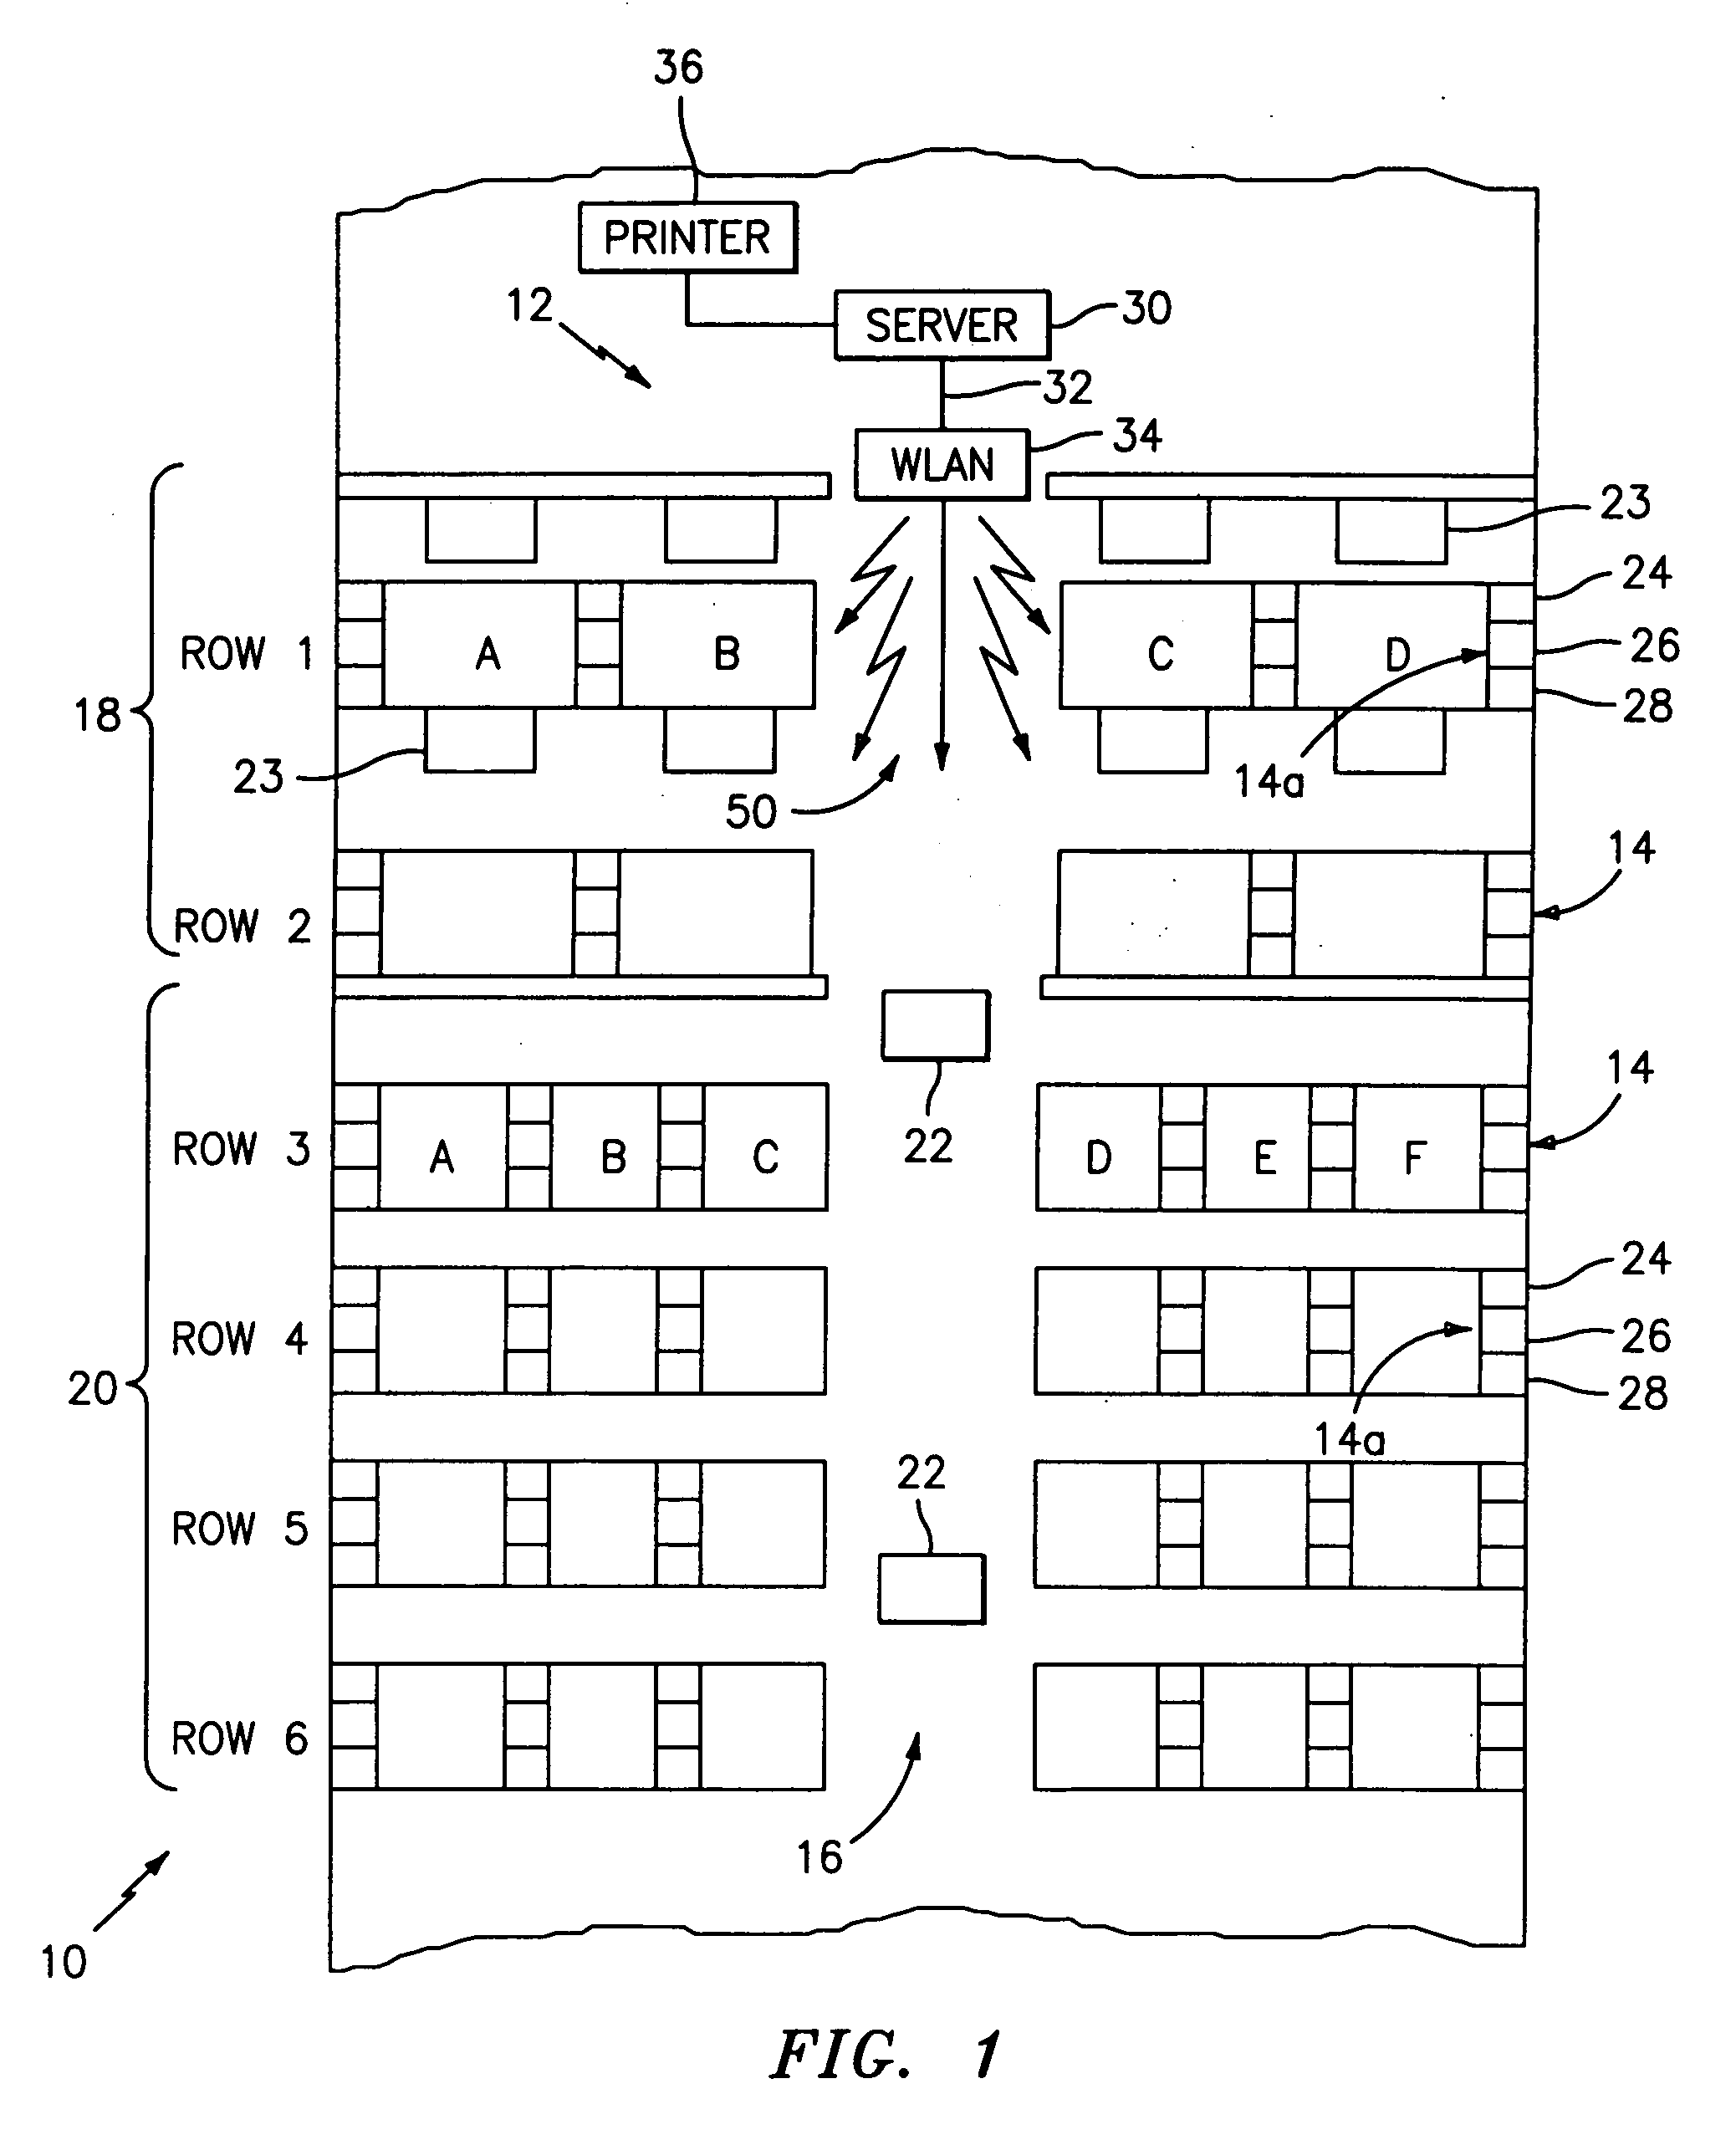 Wireless data communications system for a transportation vehicle